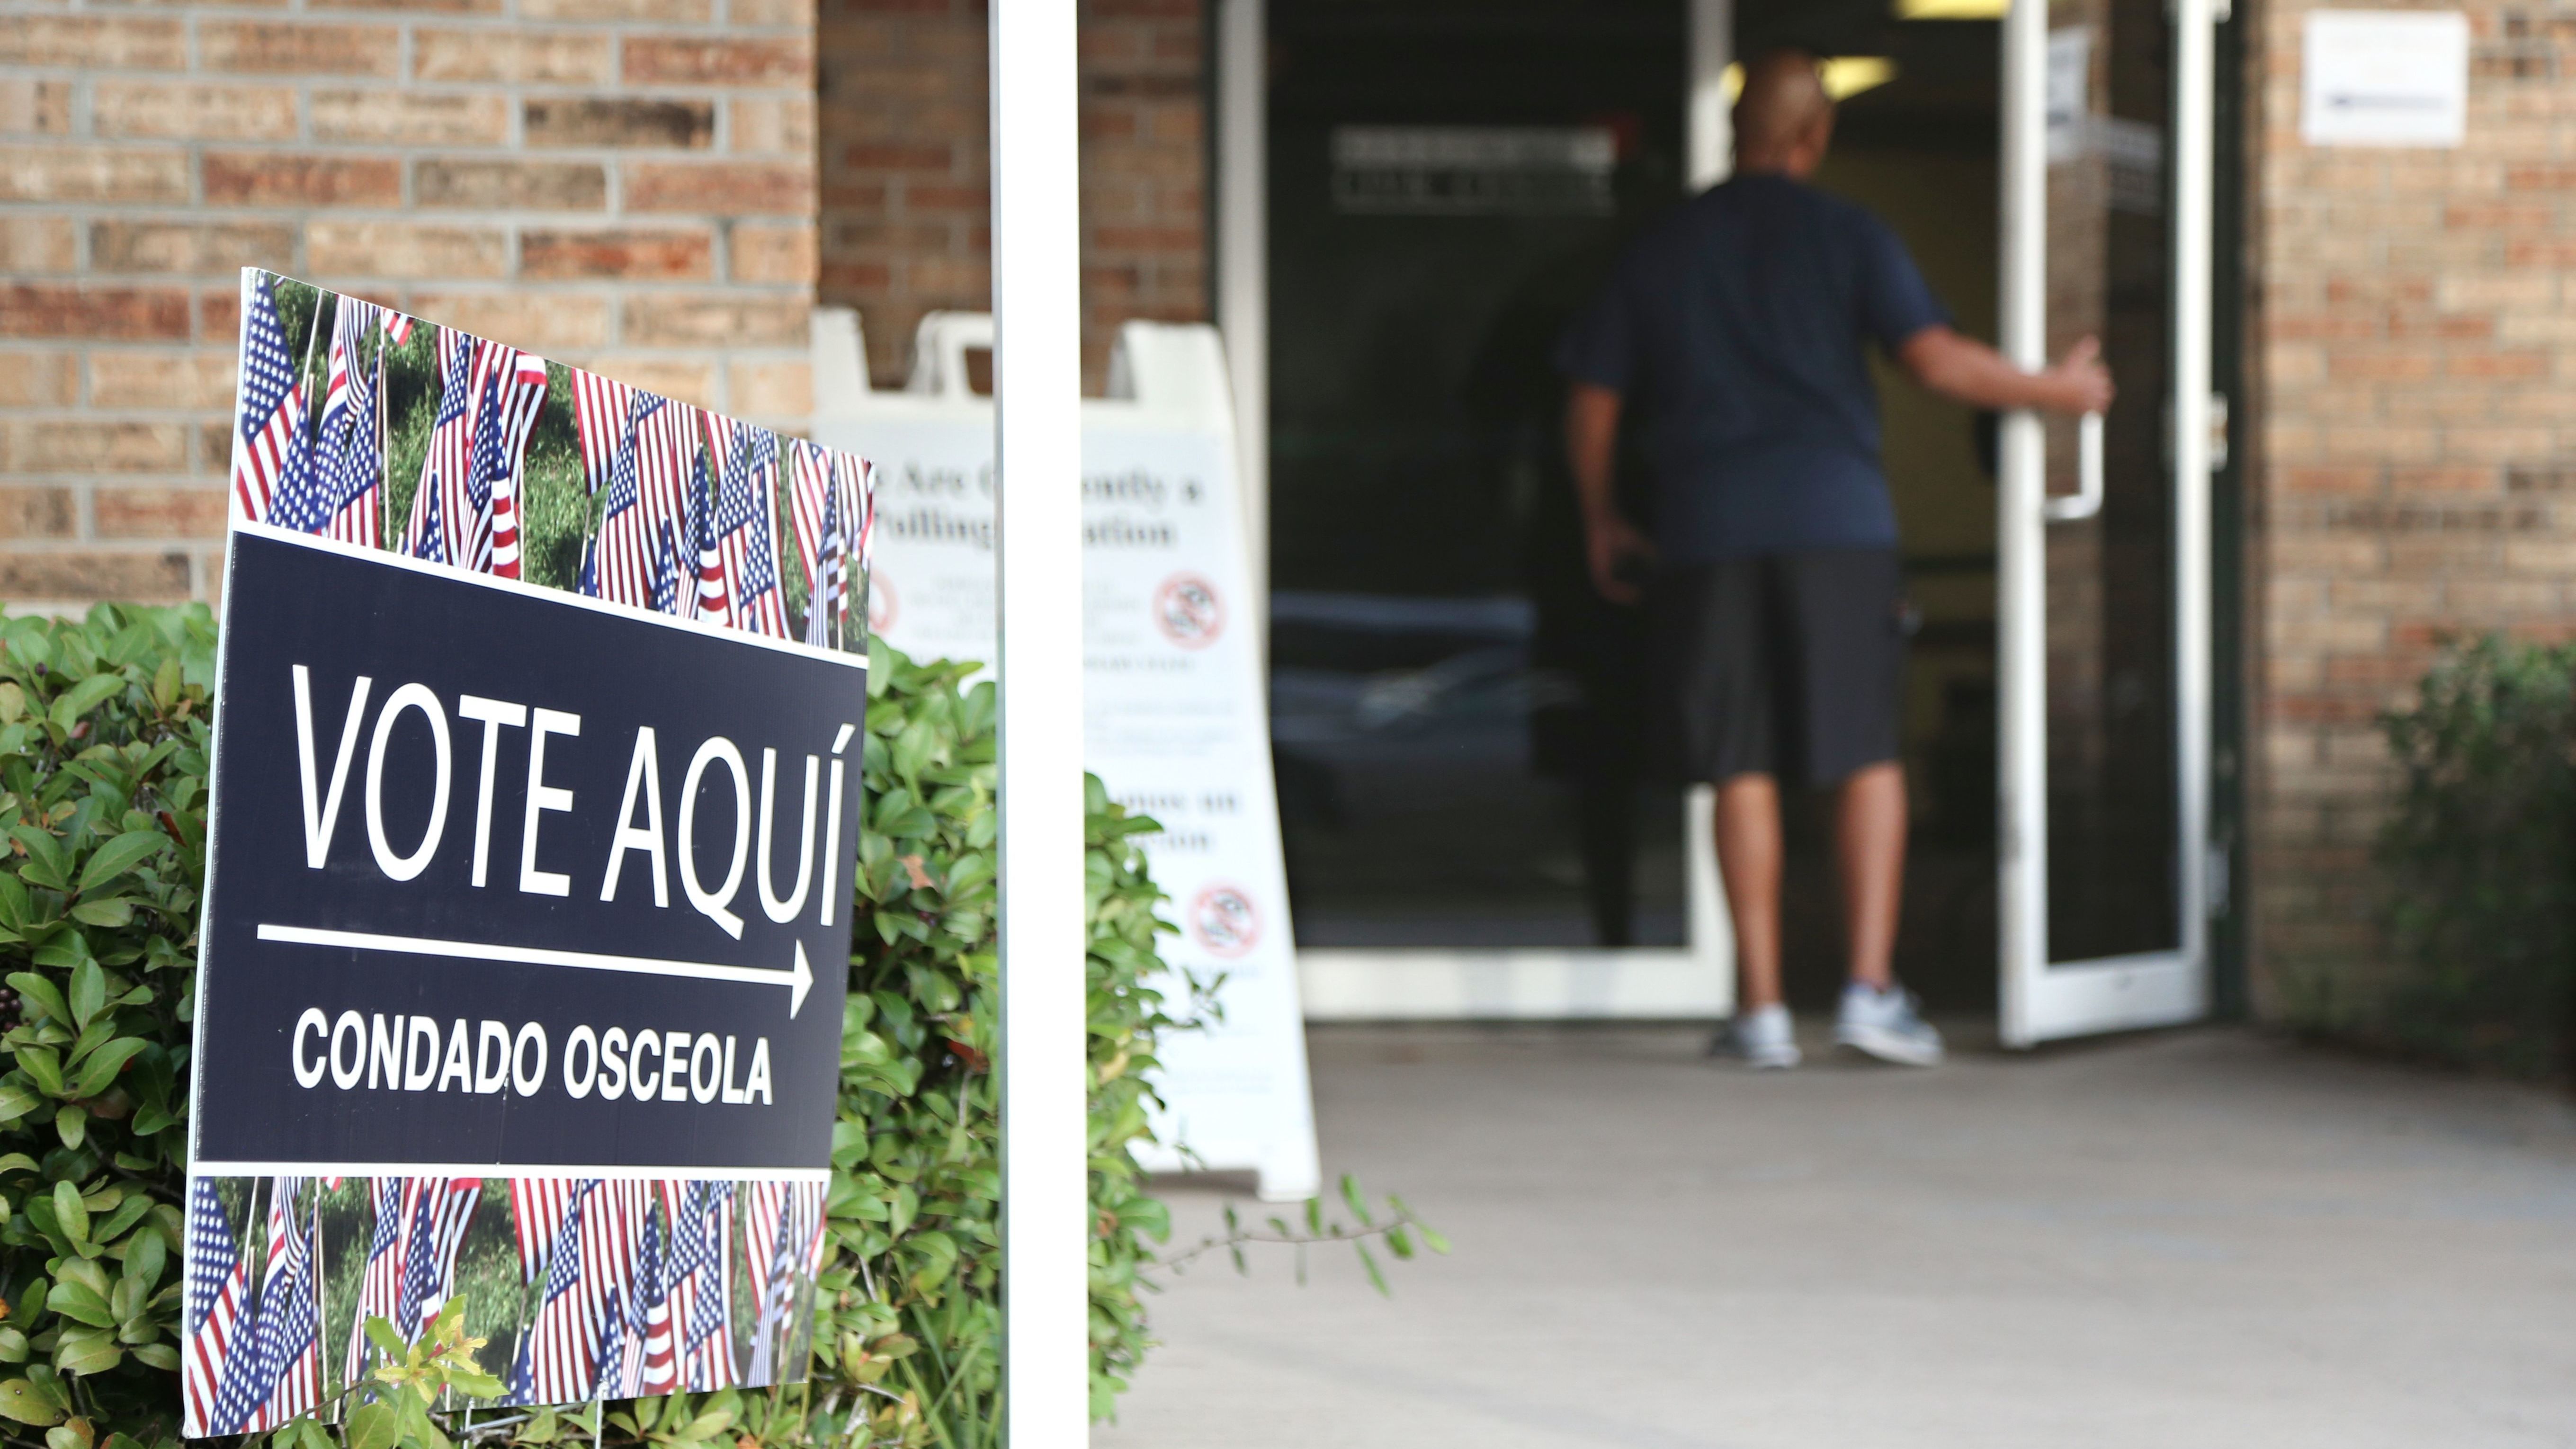 A voter enters an Osceola County polling station during early voting in the federal election in Kissimee, Florida on October 25, 2016.
